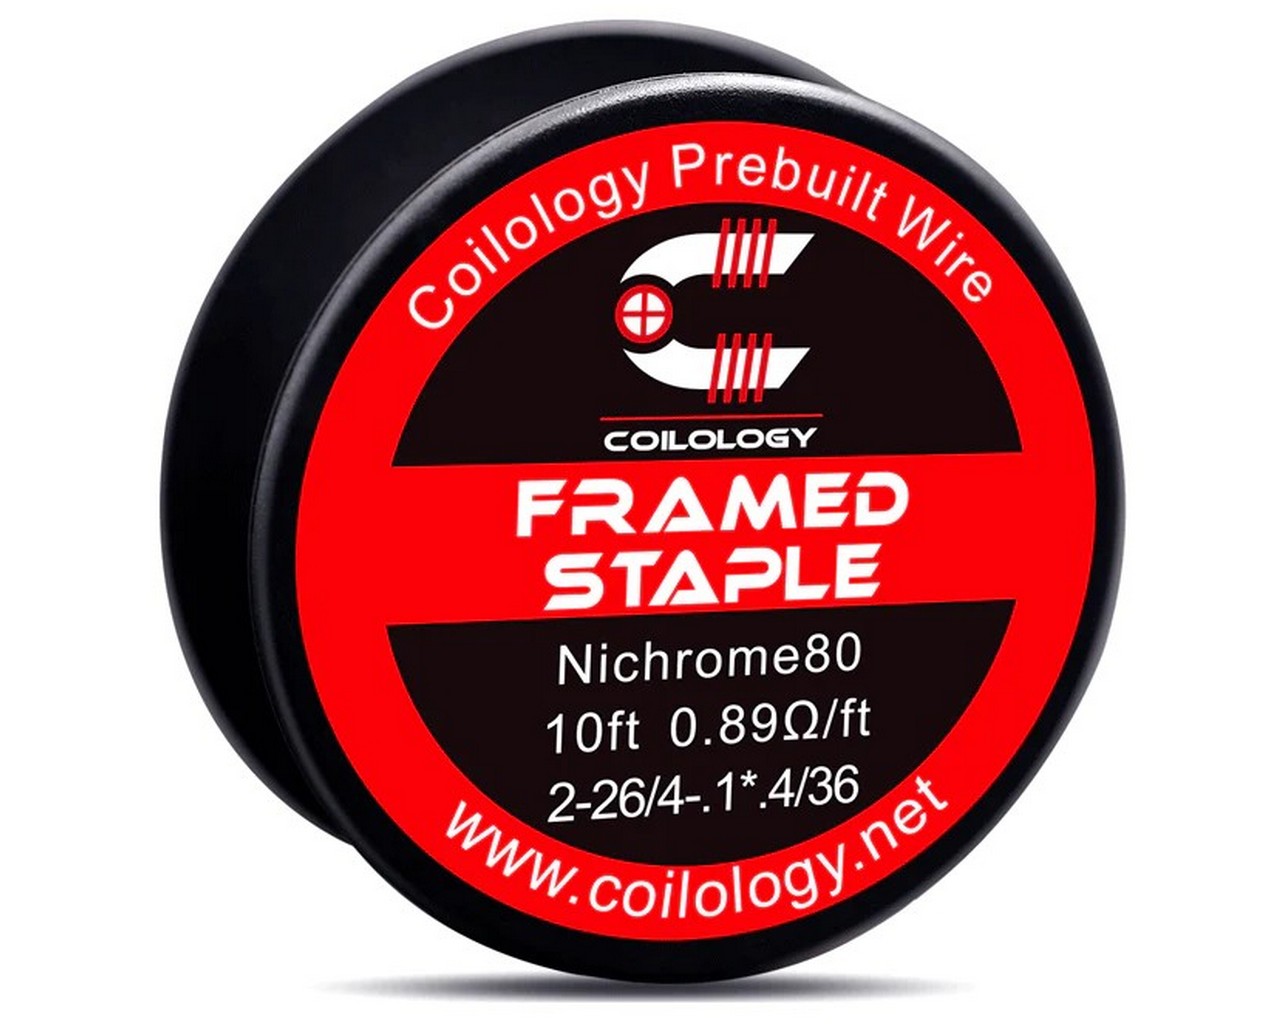 Coilology Framed Staple Spool Wire NI80 2-26/4-.4*.1/36 | 0.89ohm/ft | 3m